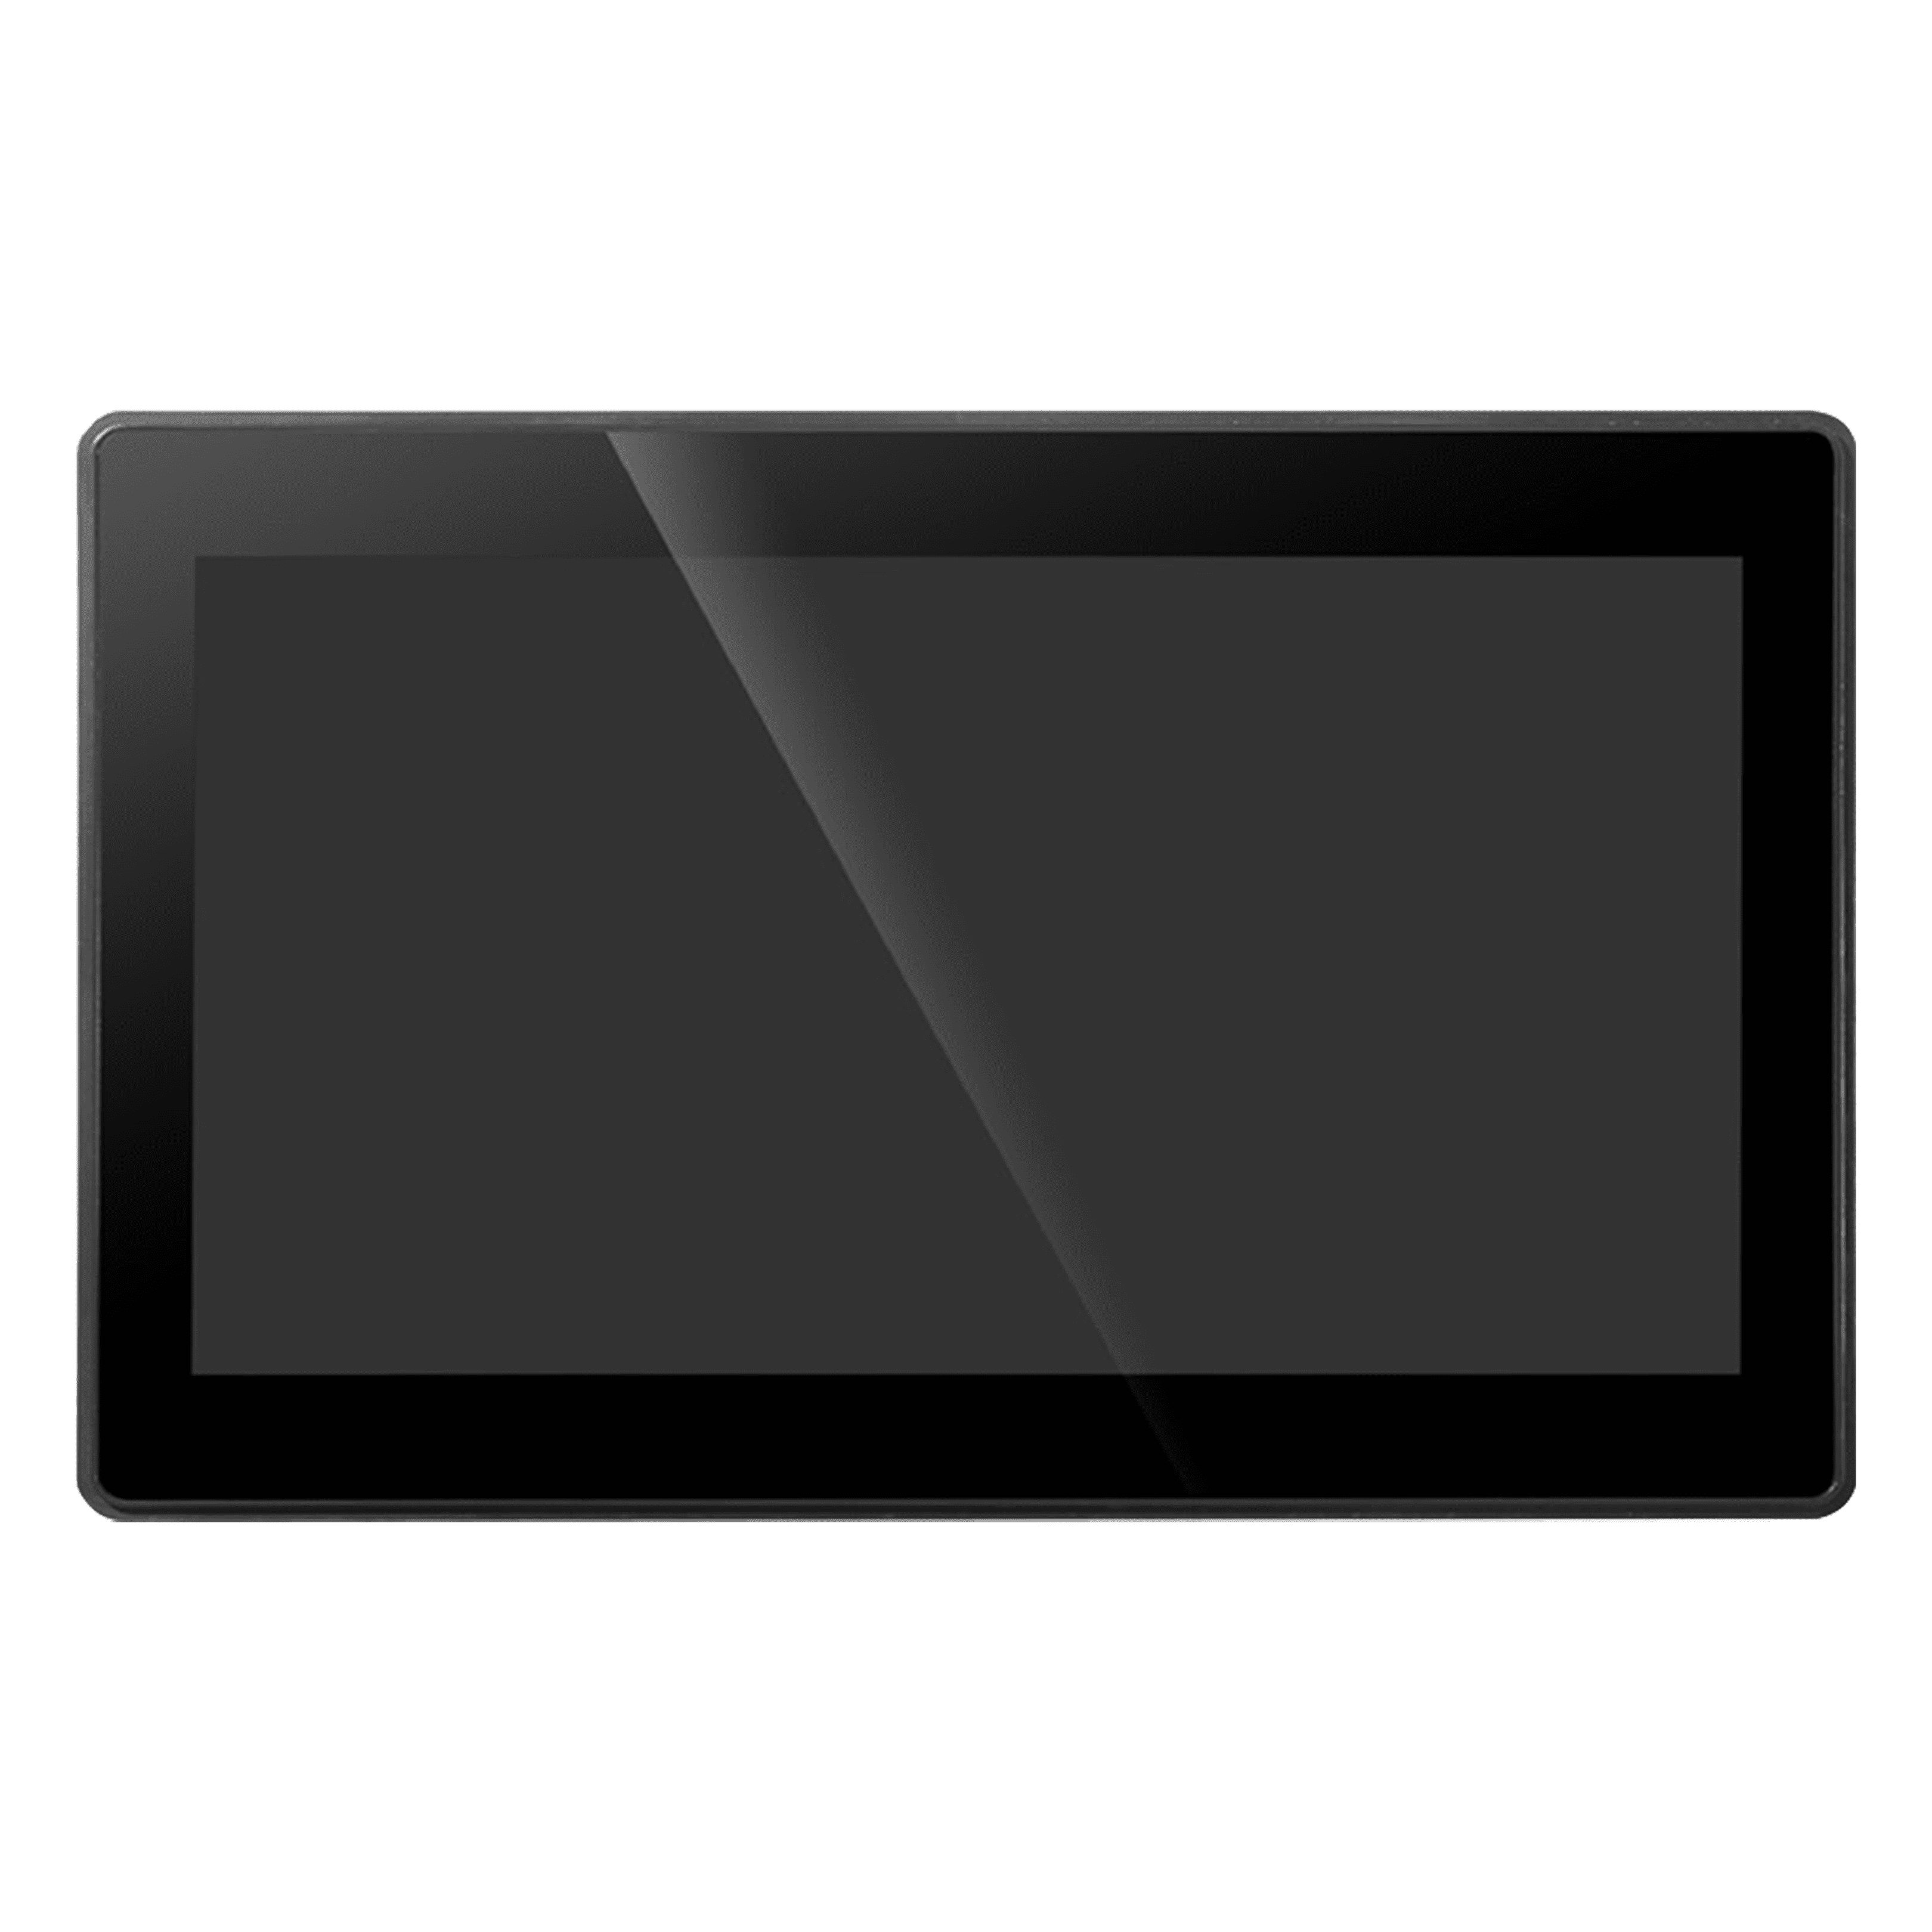 15.6 inch capacitive touch monitor